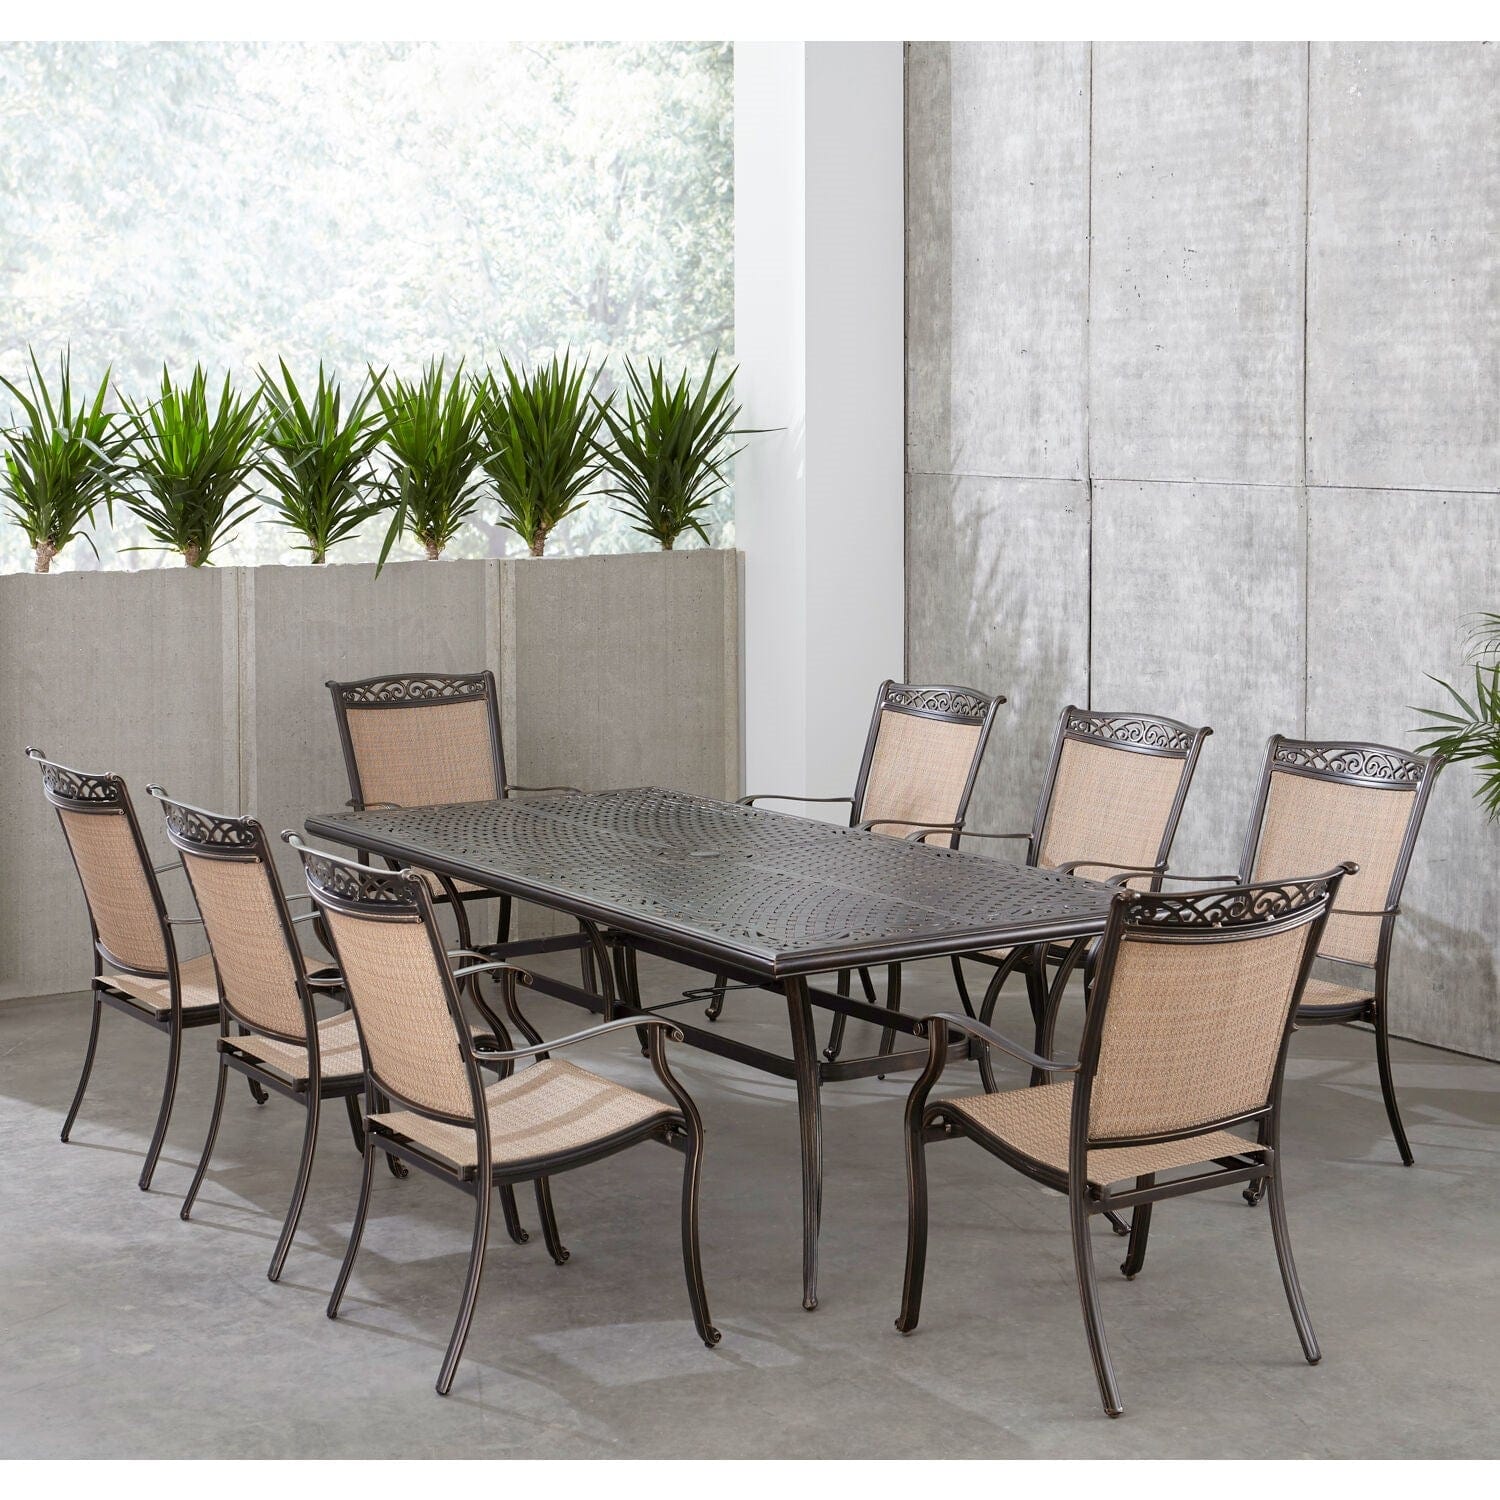 Hanover Outdoor Dining Set Hanover - Fontana 9-Piece Dining Set with Eight Stationary Dining Chairs and an Extra-Large Glass-Top Dining Table | FNTDN9PCC